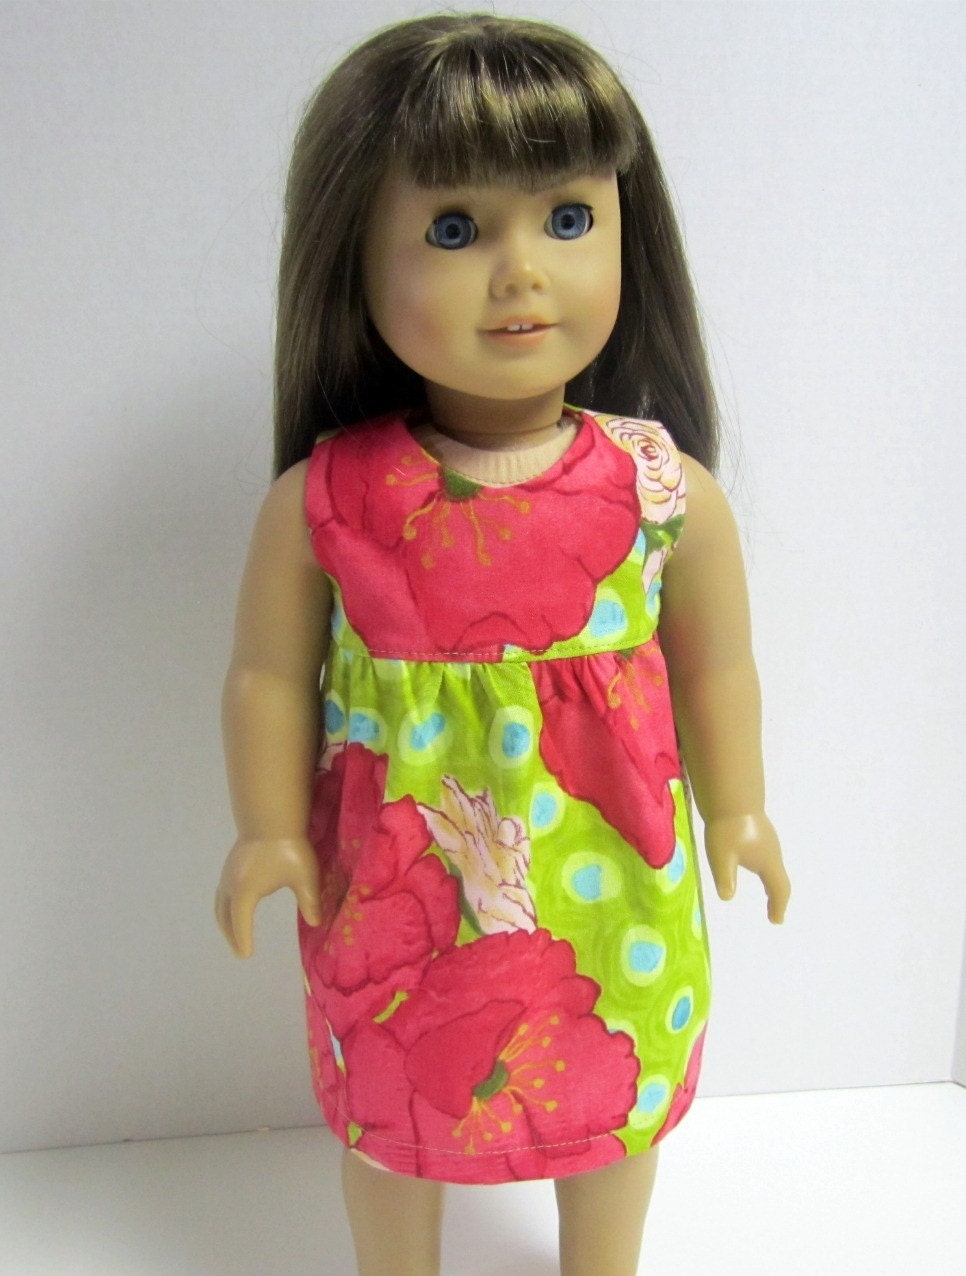 Simple Sun Dress for American Girl 18inch Doll in Laura Gunn Poppy by Crazy For Hue